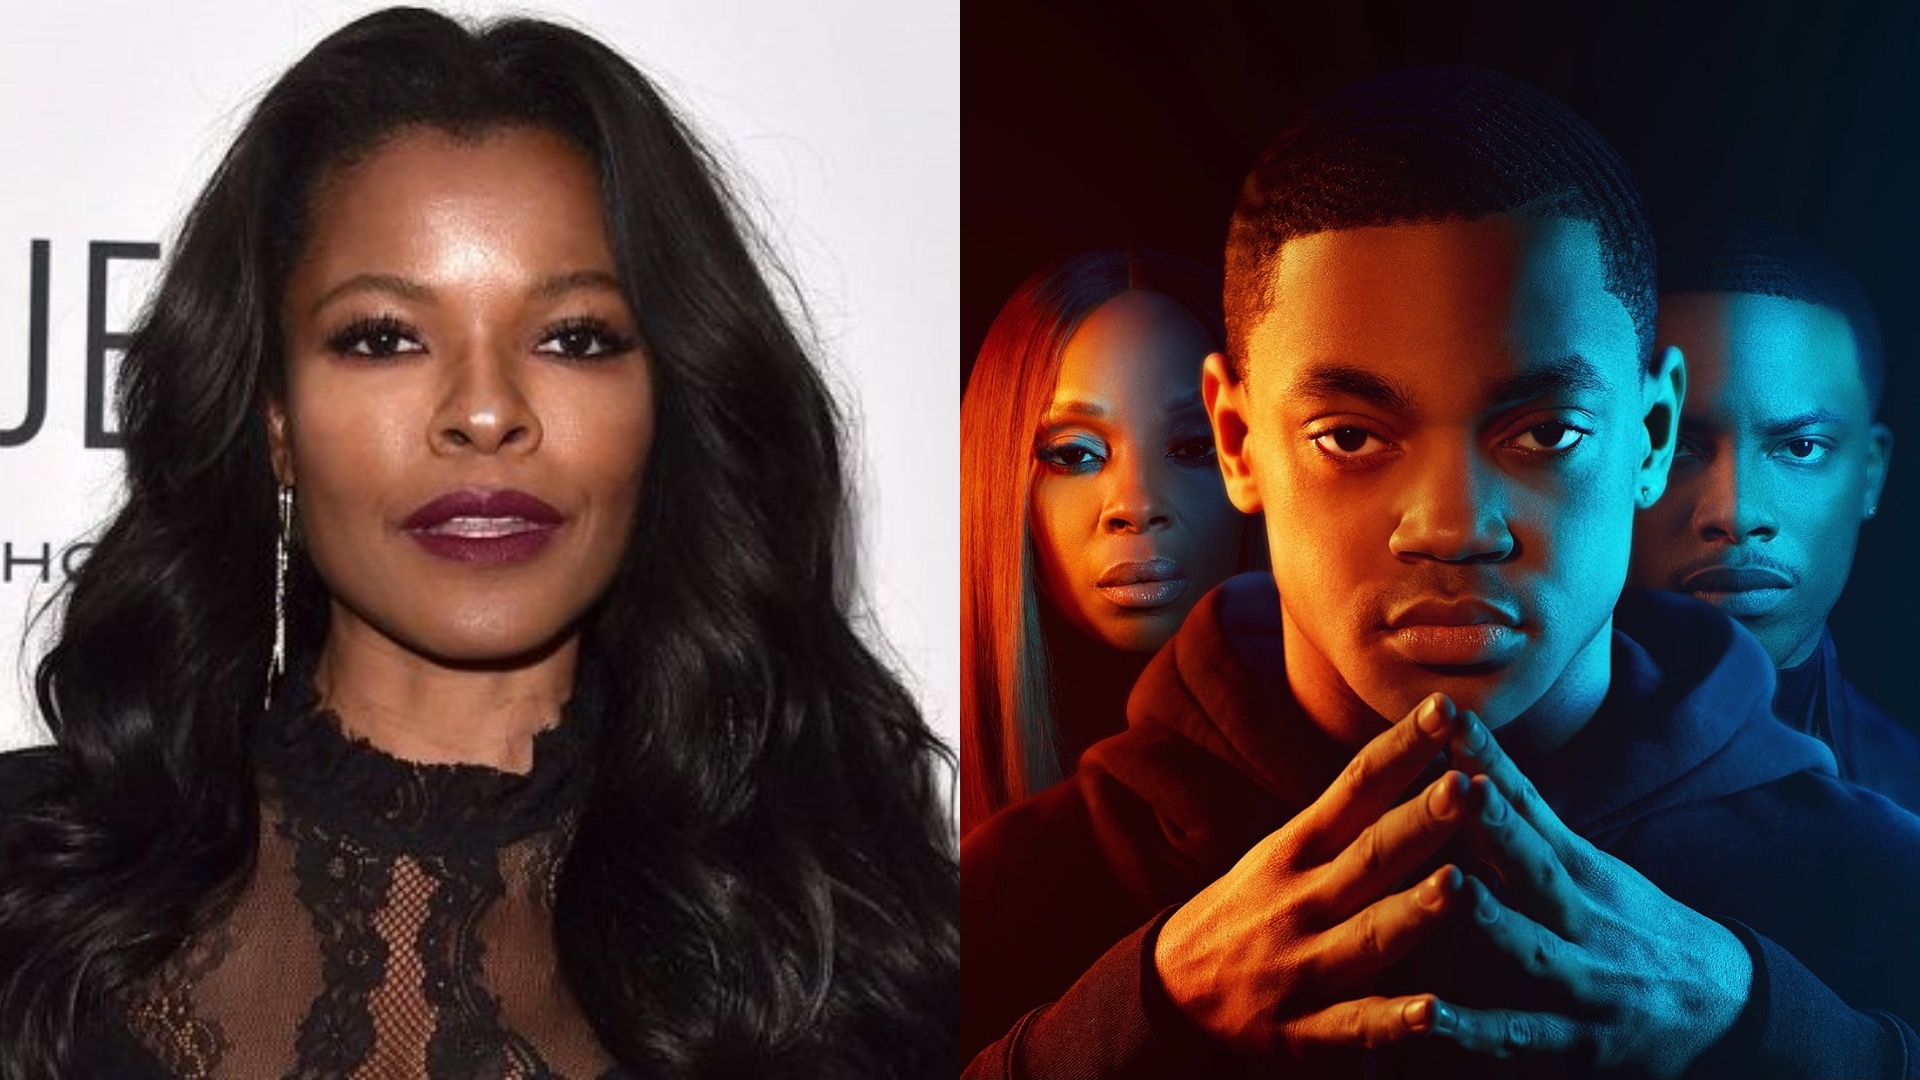 Deadline is exclusively reporting that Keesha Sharp has signed up for a series regular role for the upcoming third season of crime drama series Power Book II: Ghost.